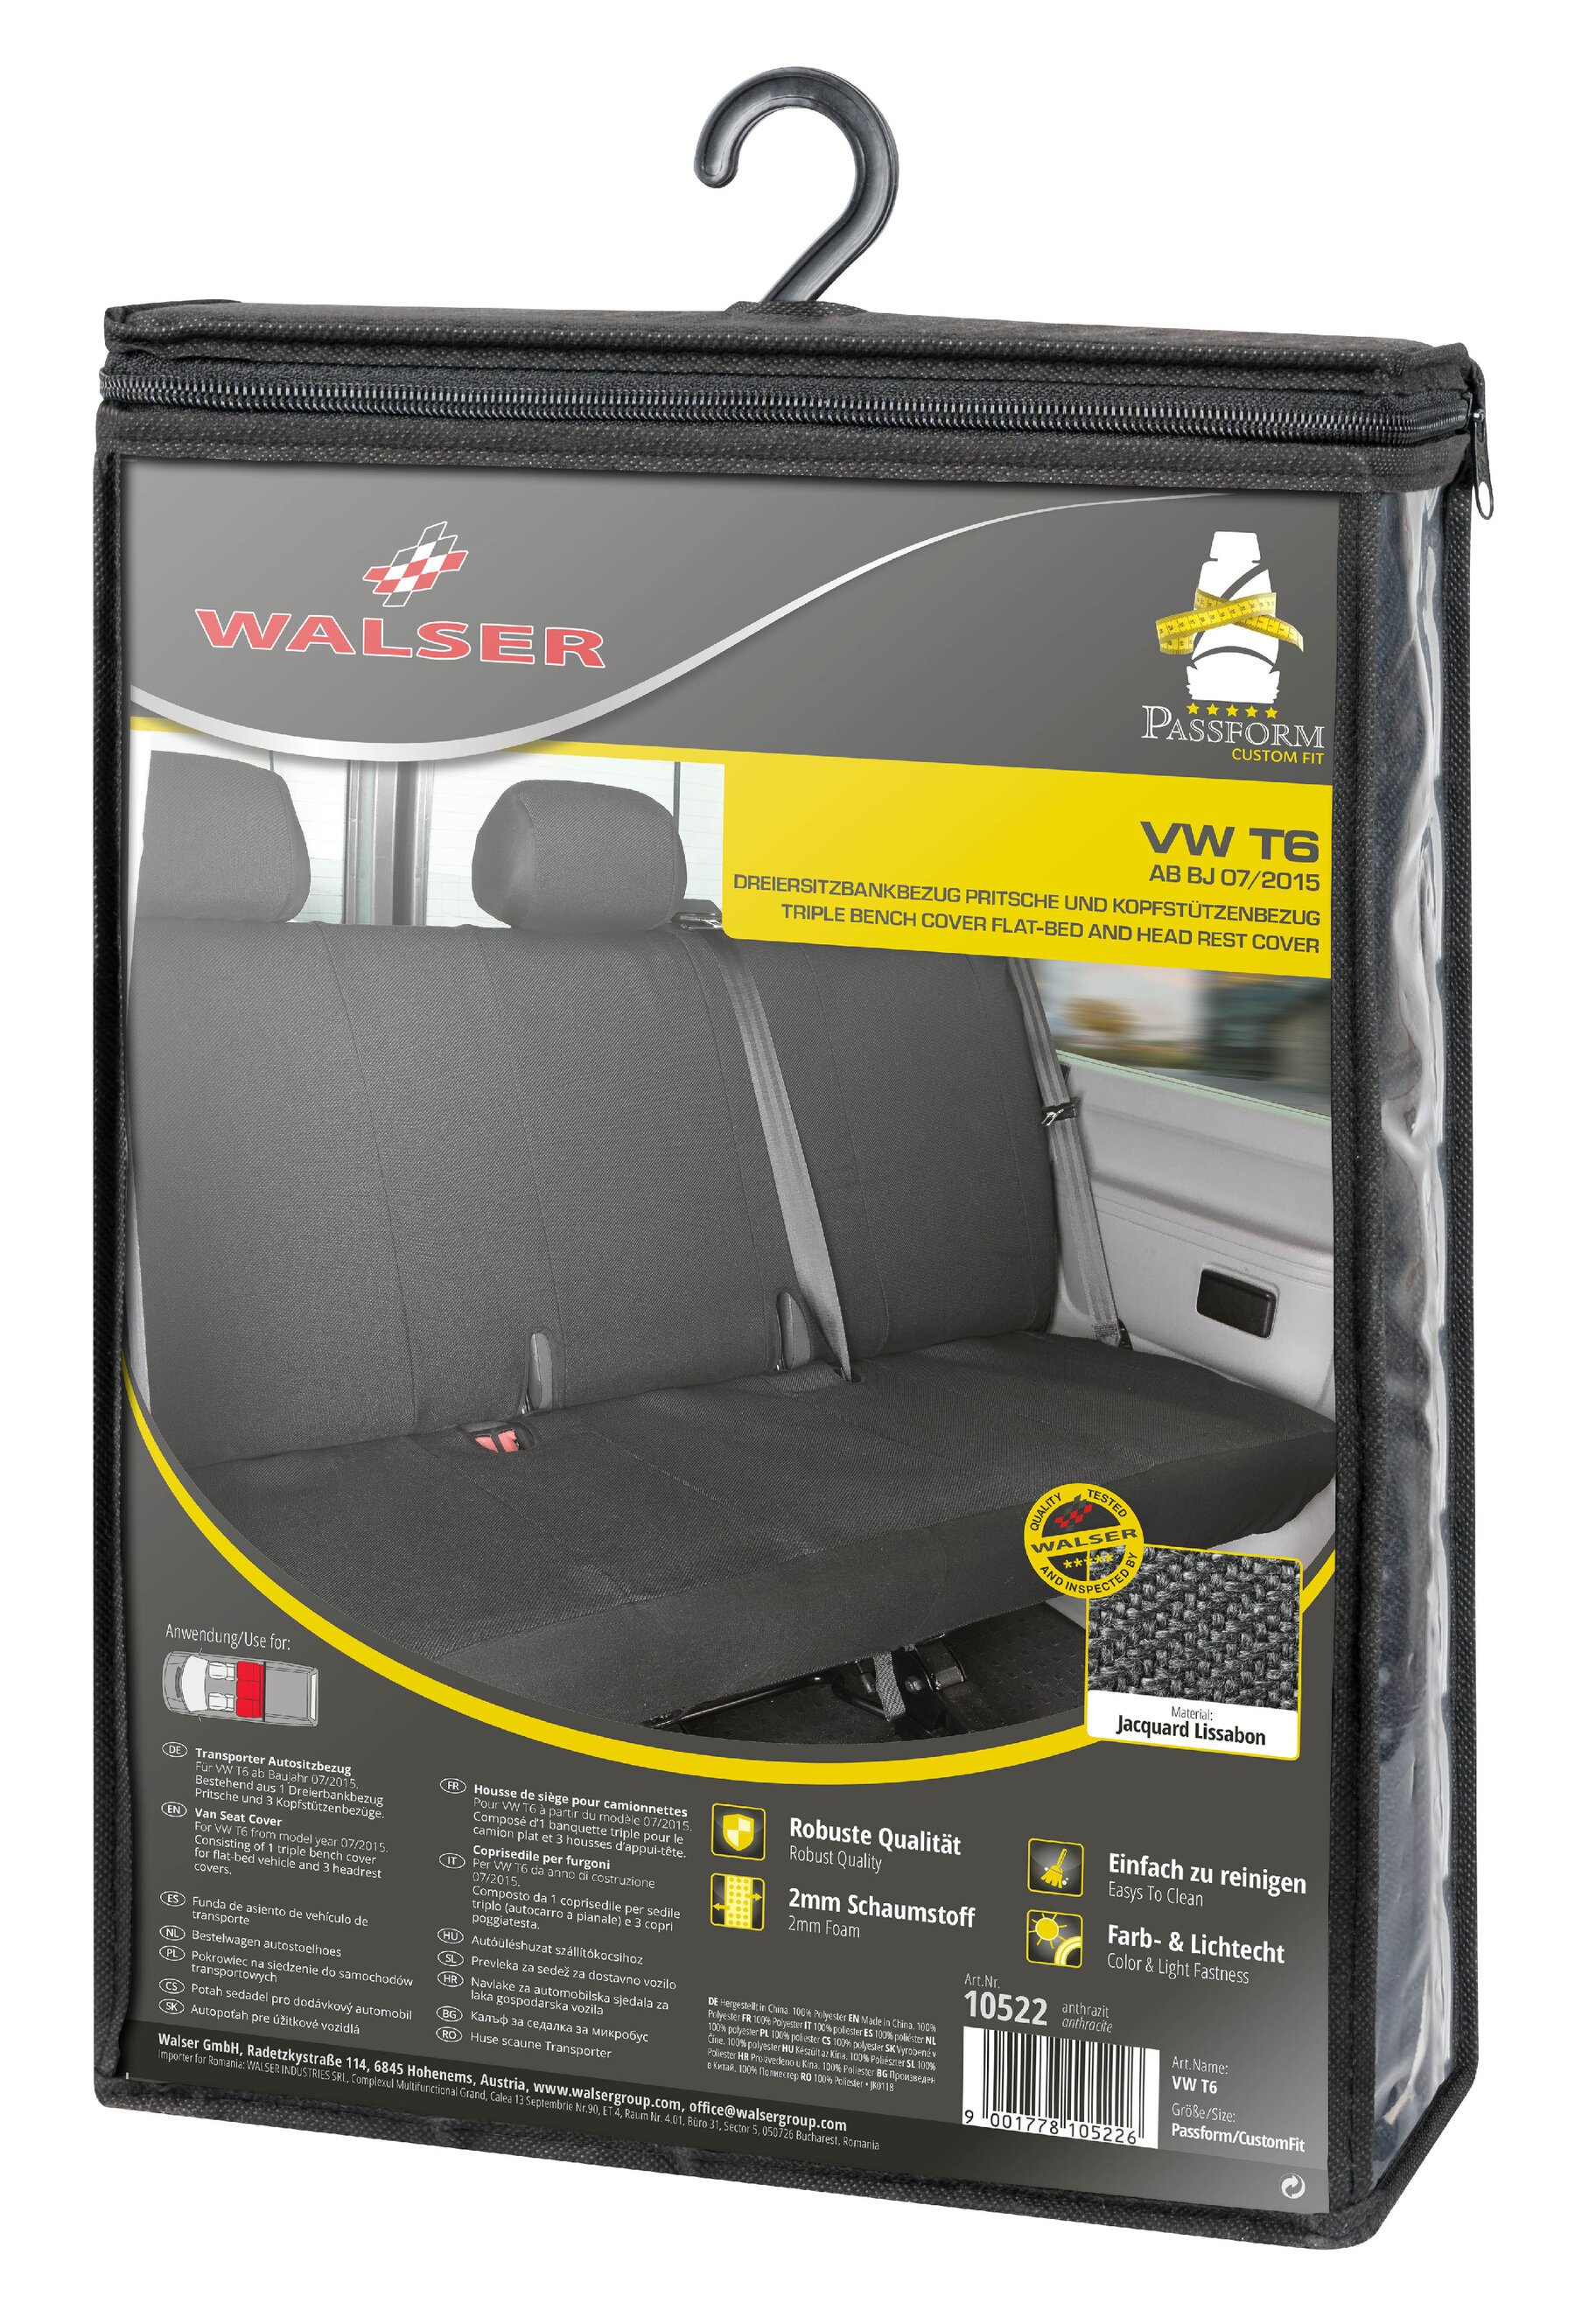 Seat cover made of fabric for VW T6, 3-seater bench cover platform